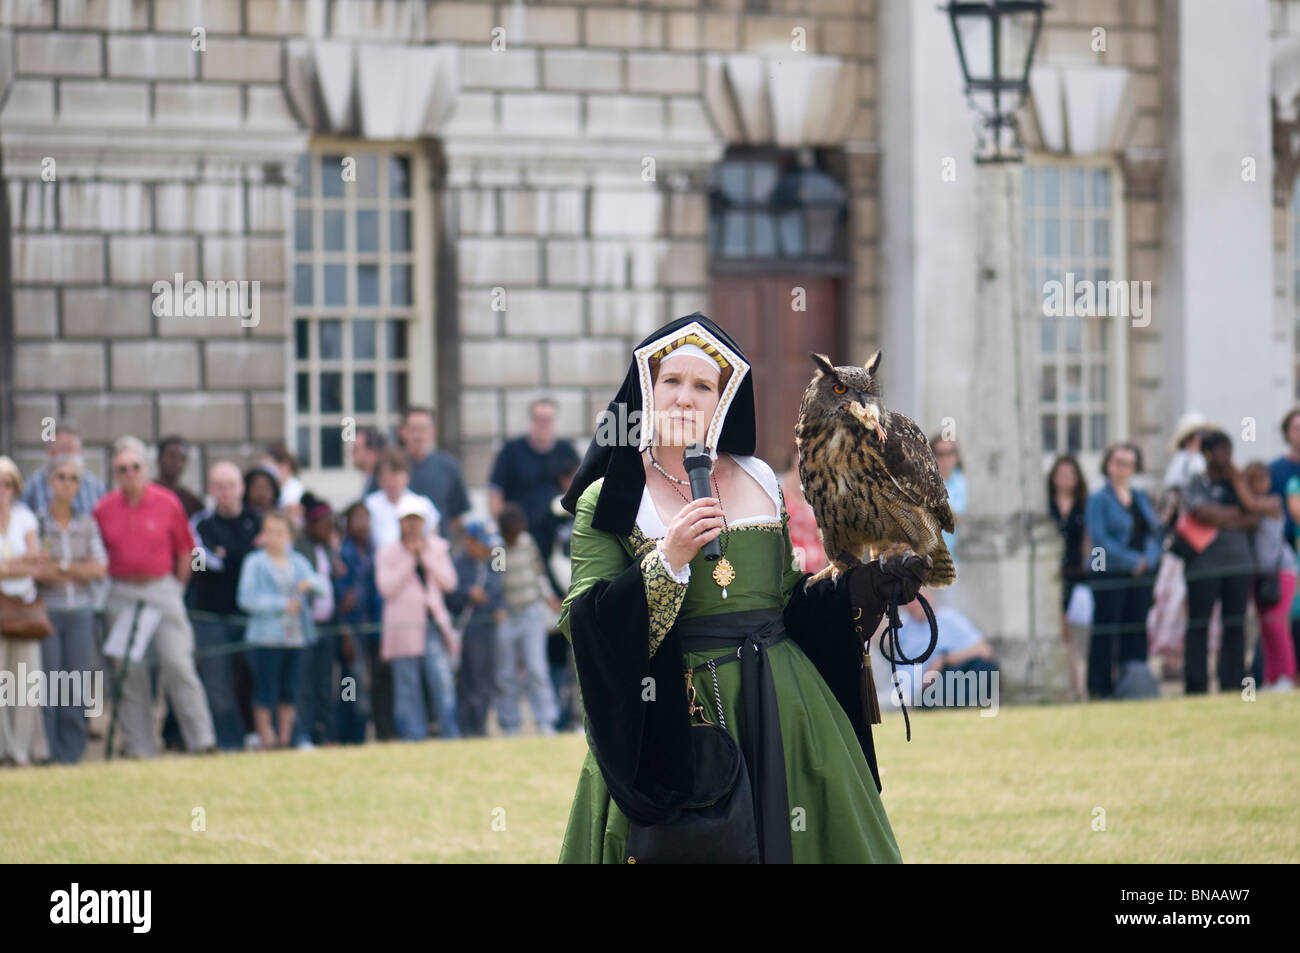 A woman with an owl during a falconry show Stock Photo